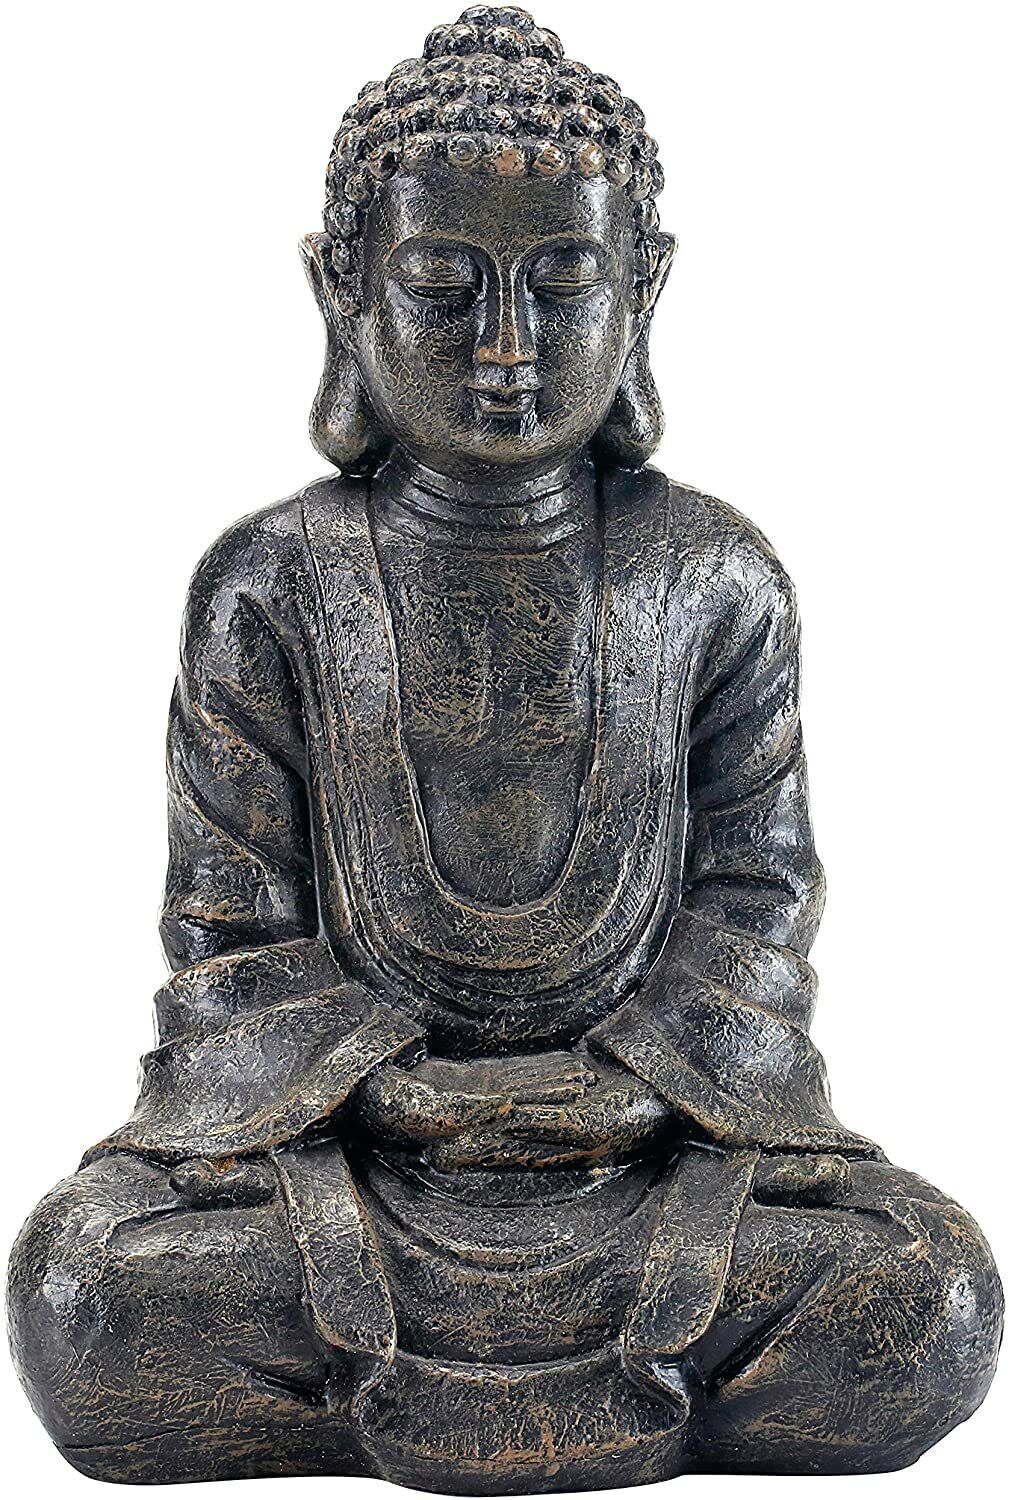 MyGift 12 inch Meditating Seated Buddha Statue Figurine with Rustic Gray Finish